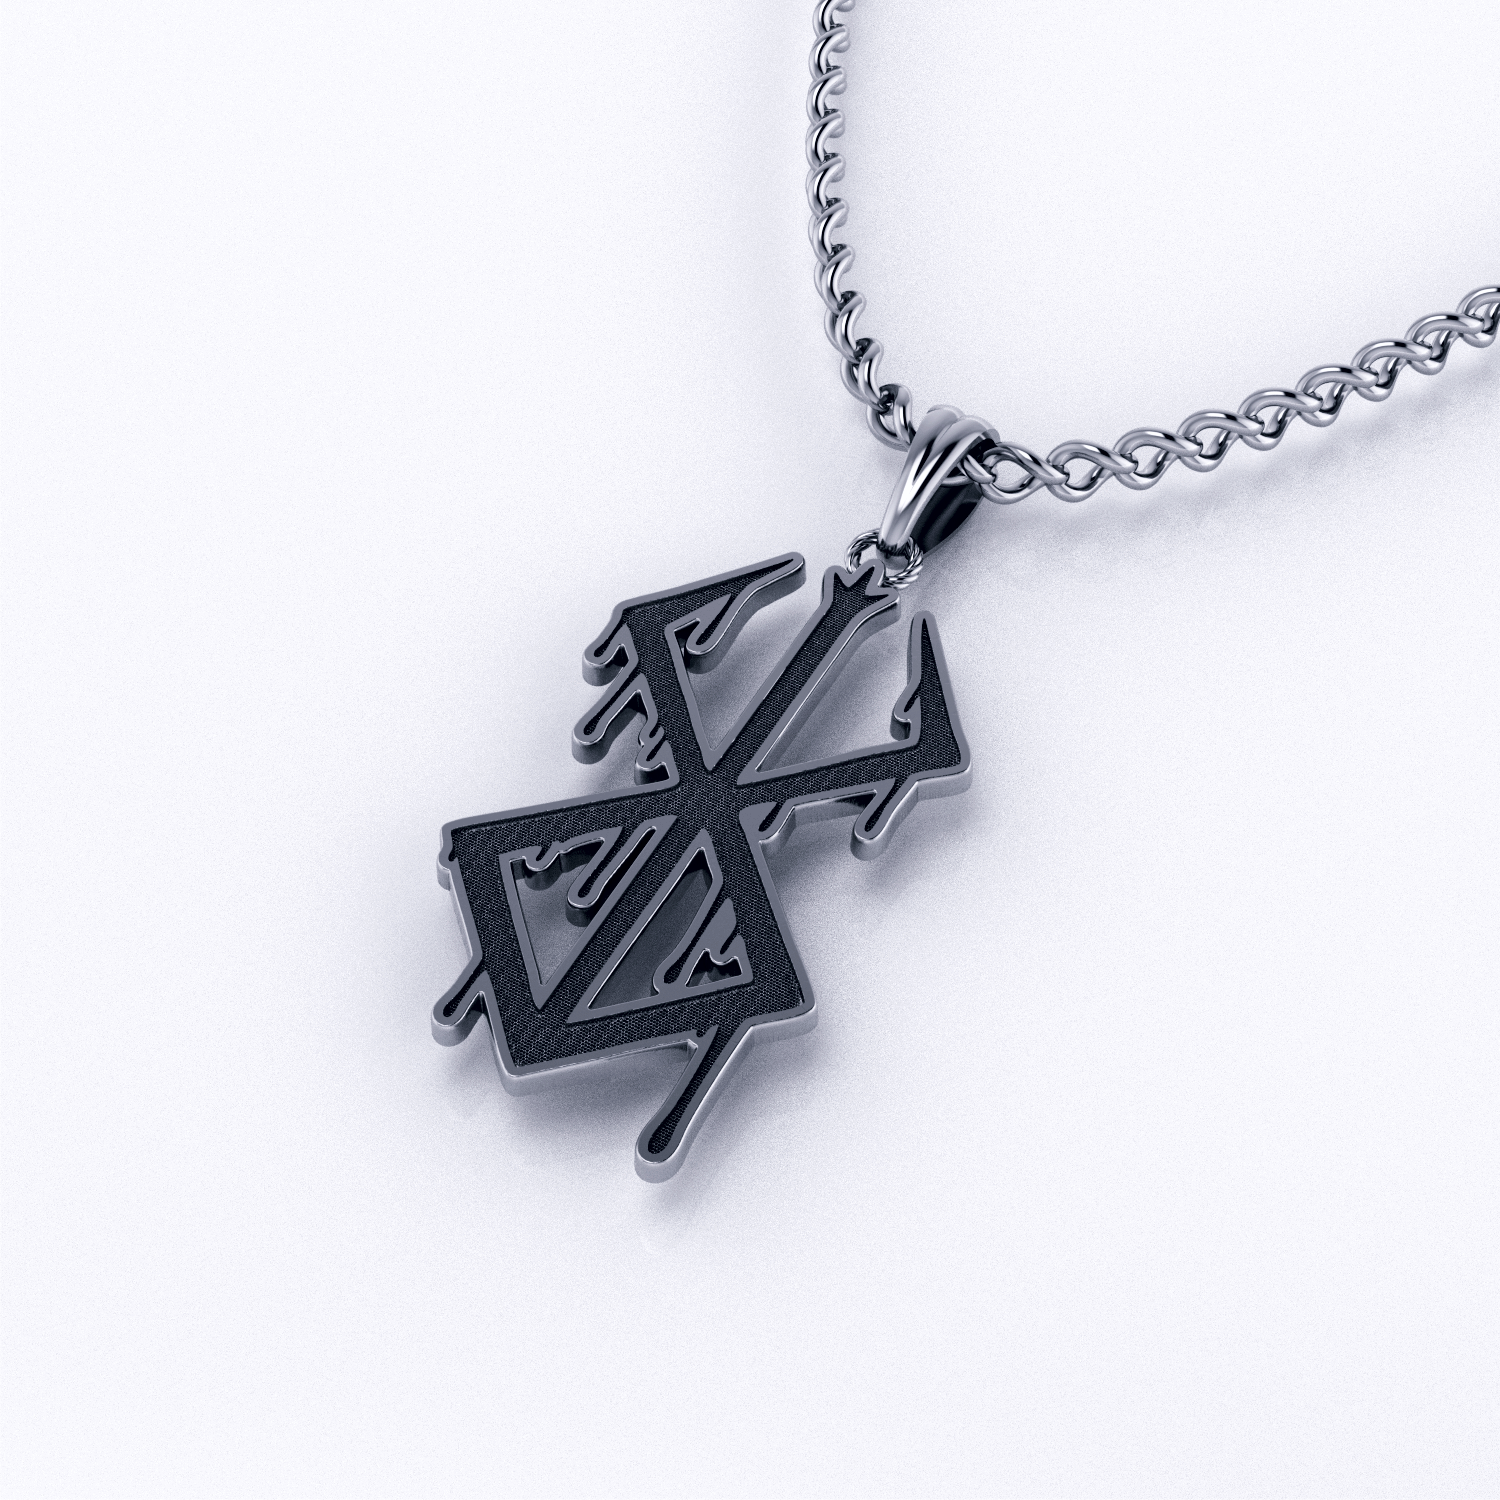 Berserk Brand OfSacrifice Cross Pendant Necklace Black Swordsman Guts Metal  Jewelry For Fans And Souvenirs 230928 From Mang05, $9.48 | DHgate.Com